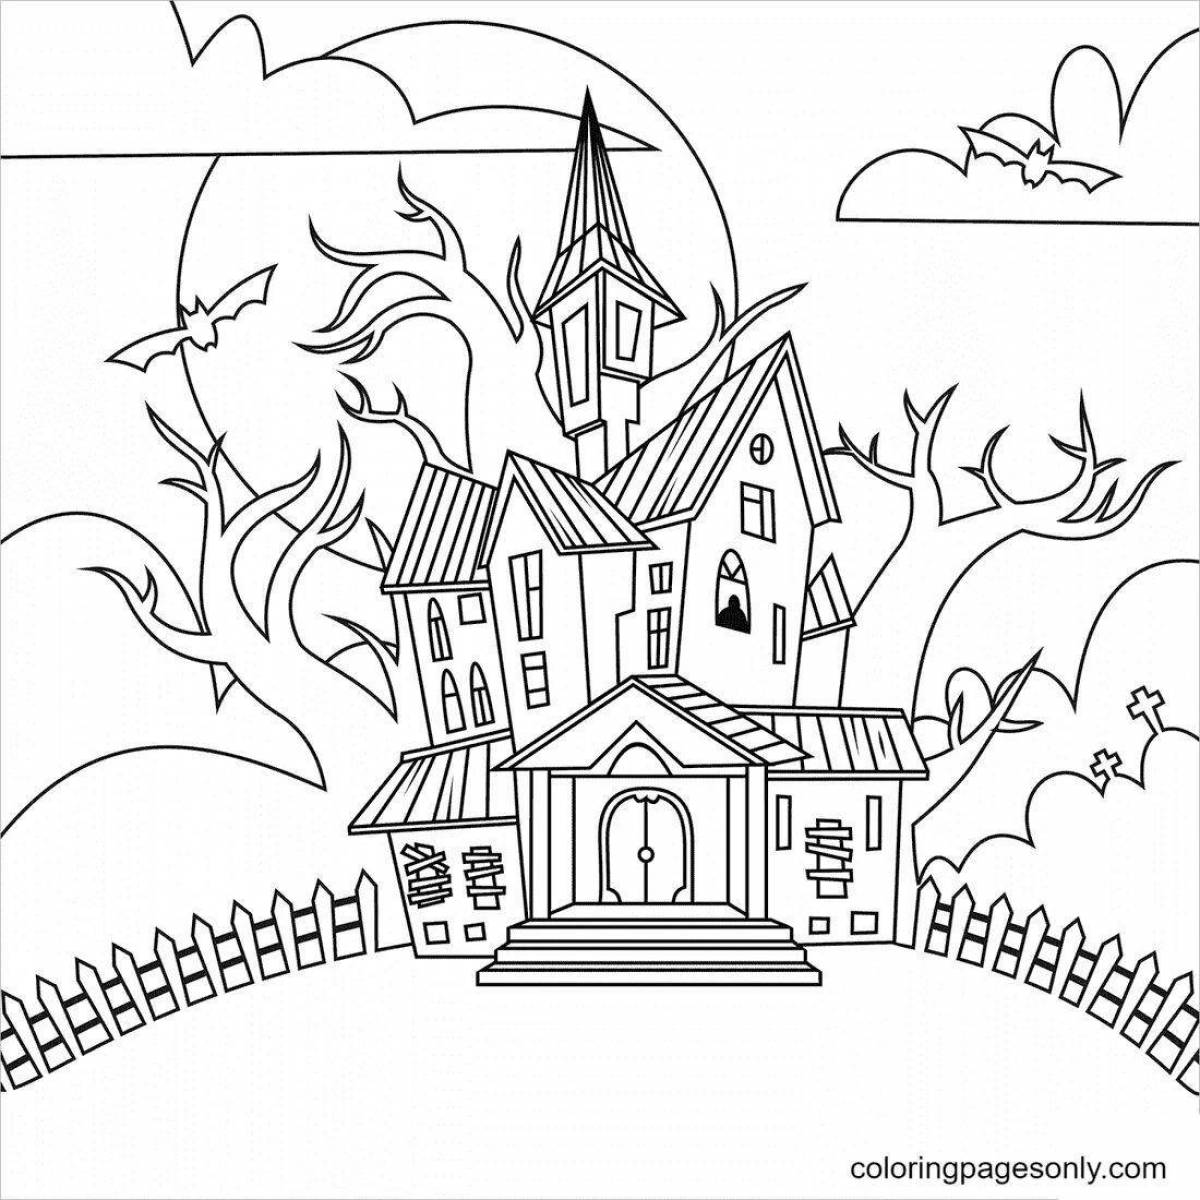 Coloring a gloomy haunted house